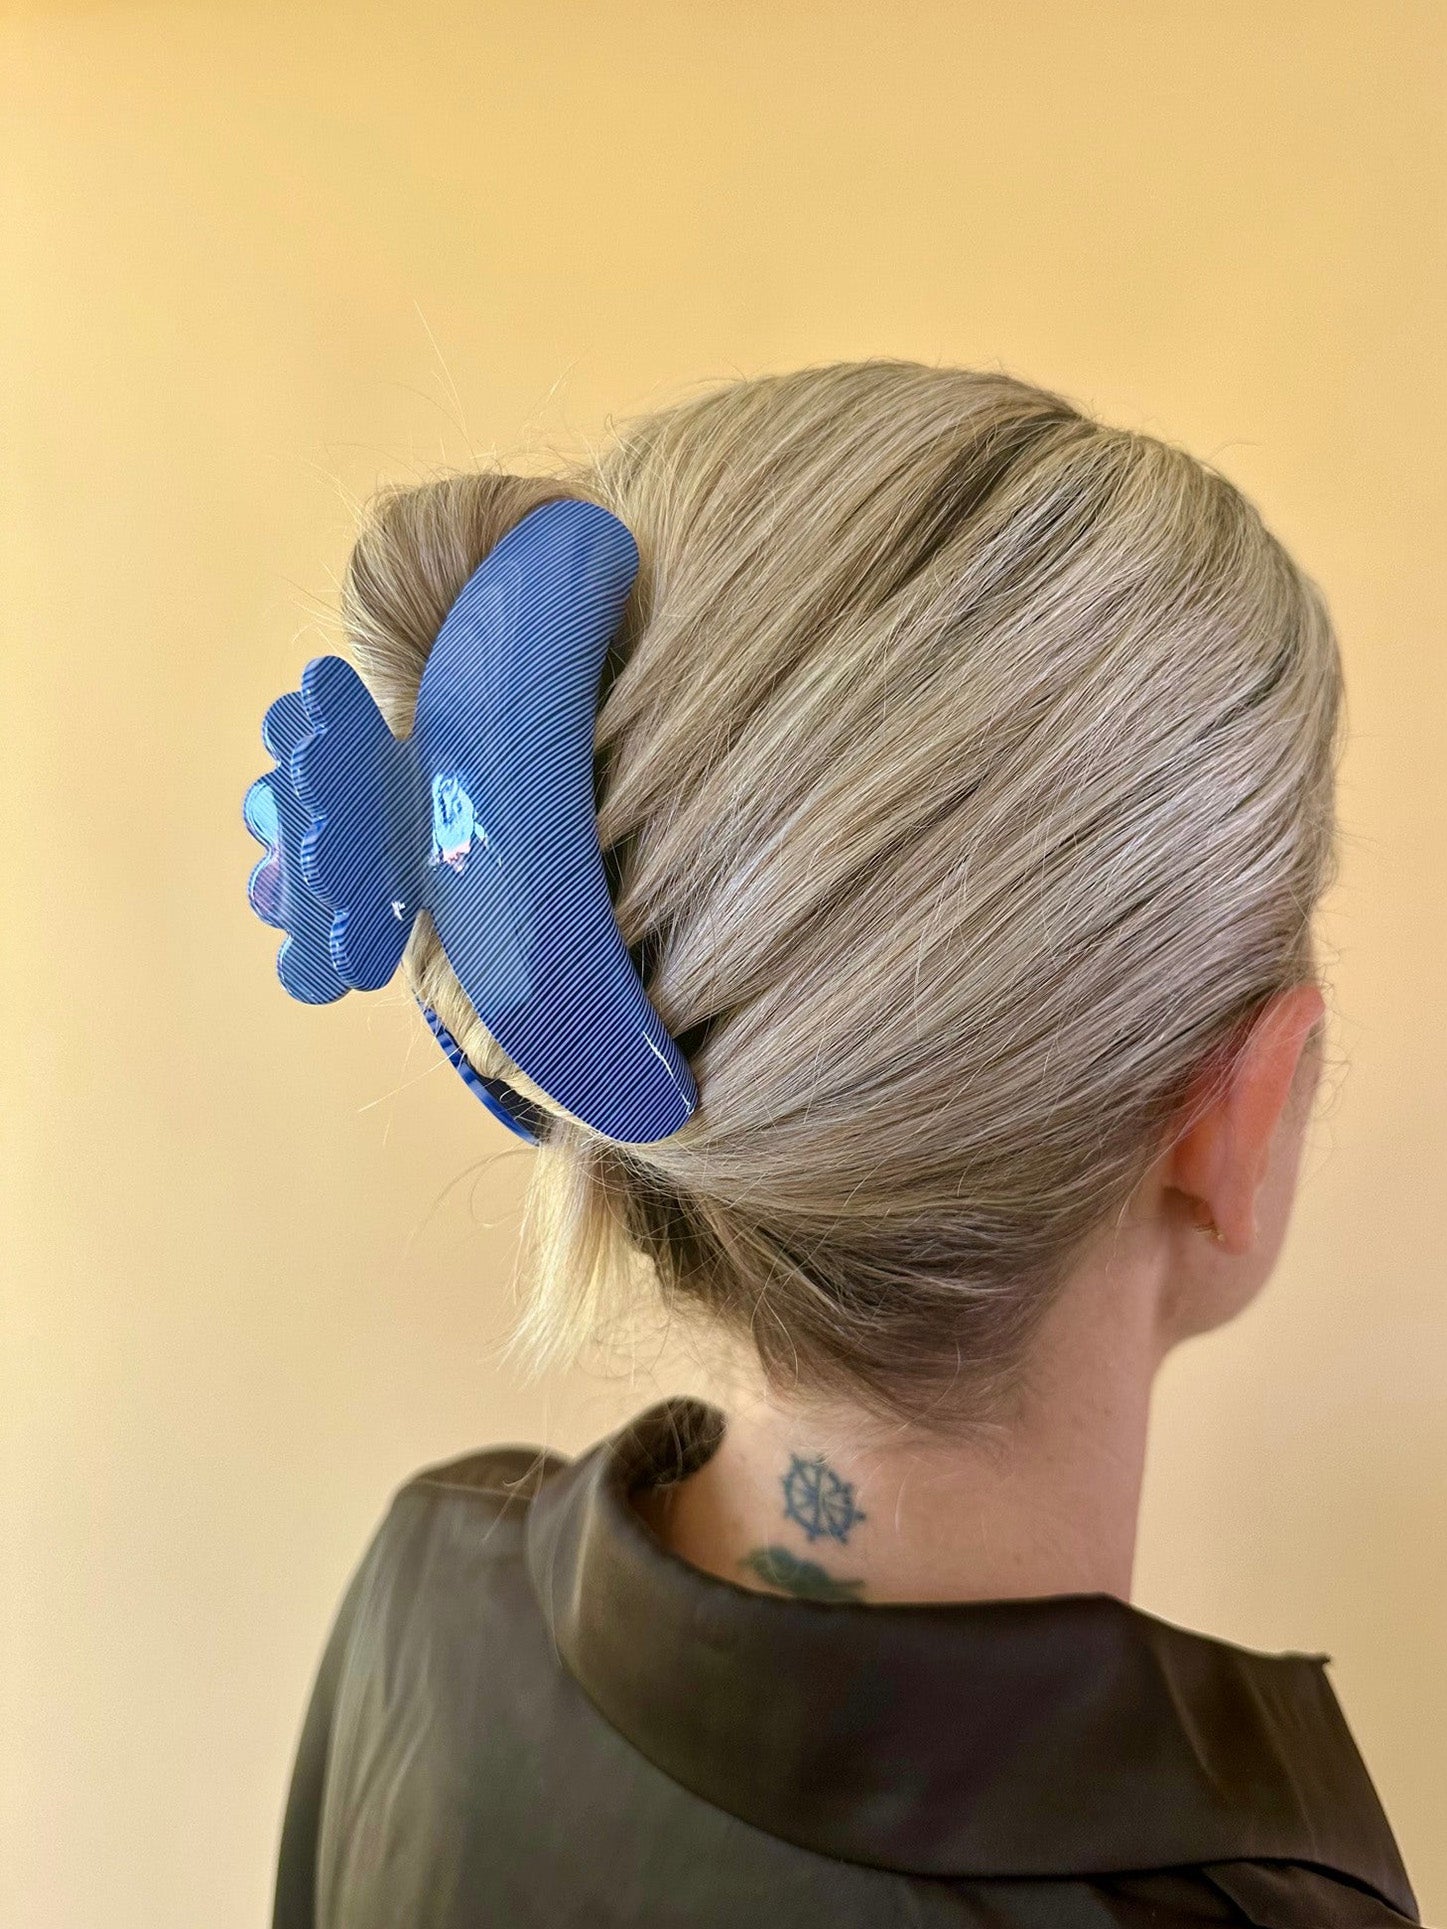 Big Helle hair claw in denim blue holding hairs in cute 1990's style updo